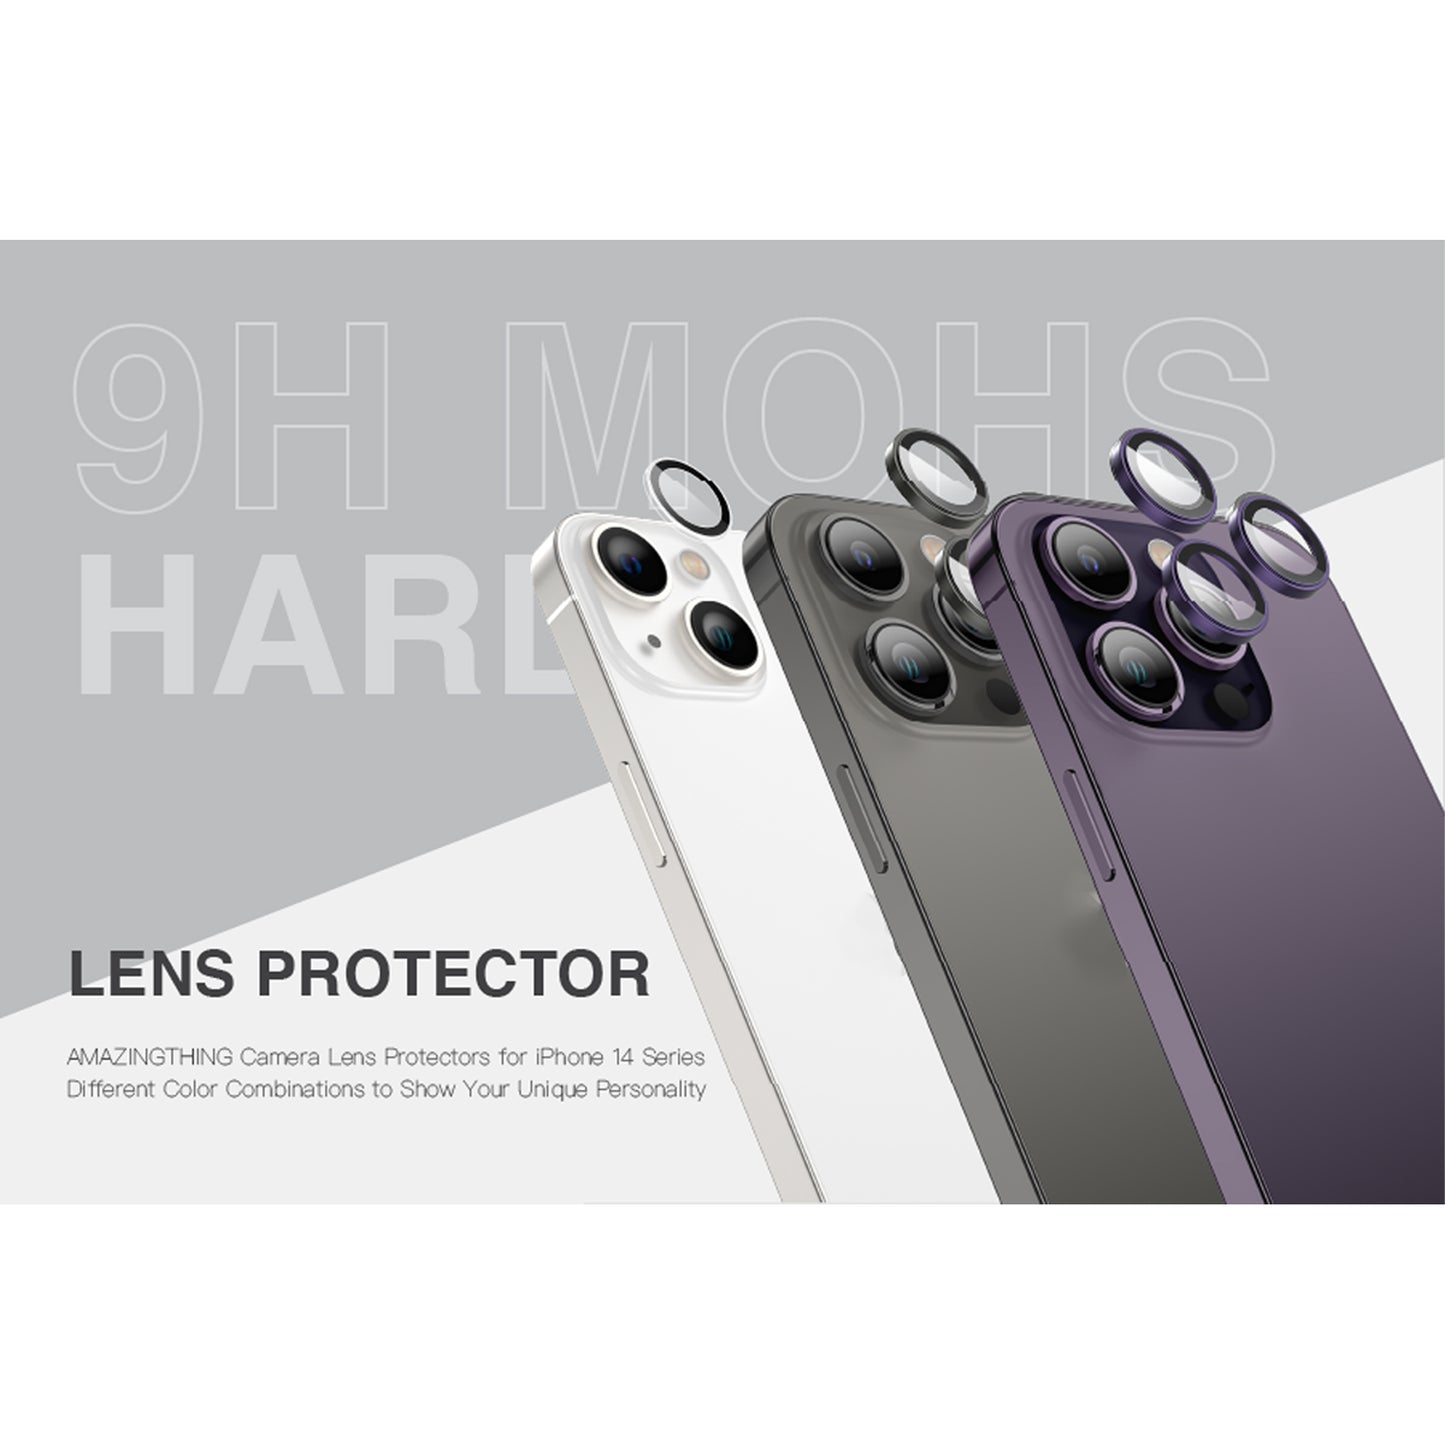 Amazingthing Lens Protector for iPhone 14 Pro - 14 Pro Max - Symphony Purple (Barcode: 4892878076111 )